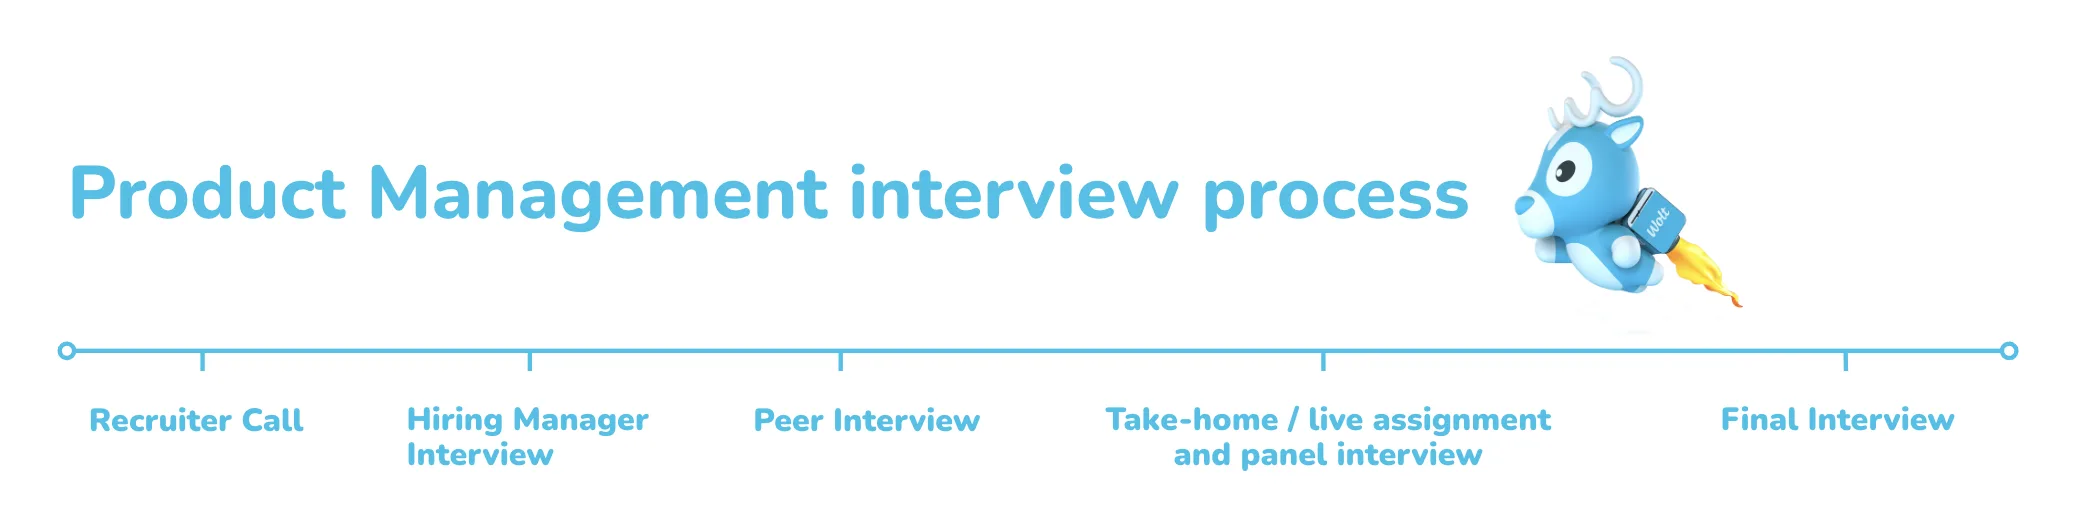 Product Management Interview Process